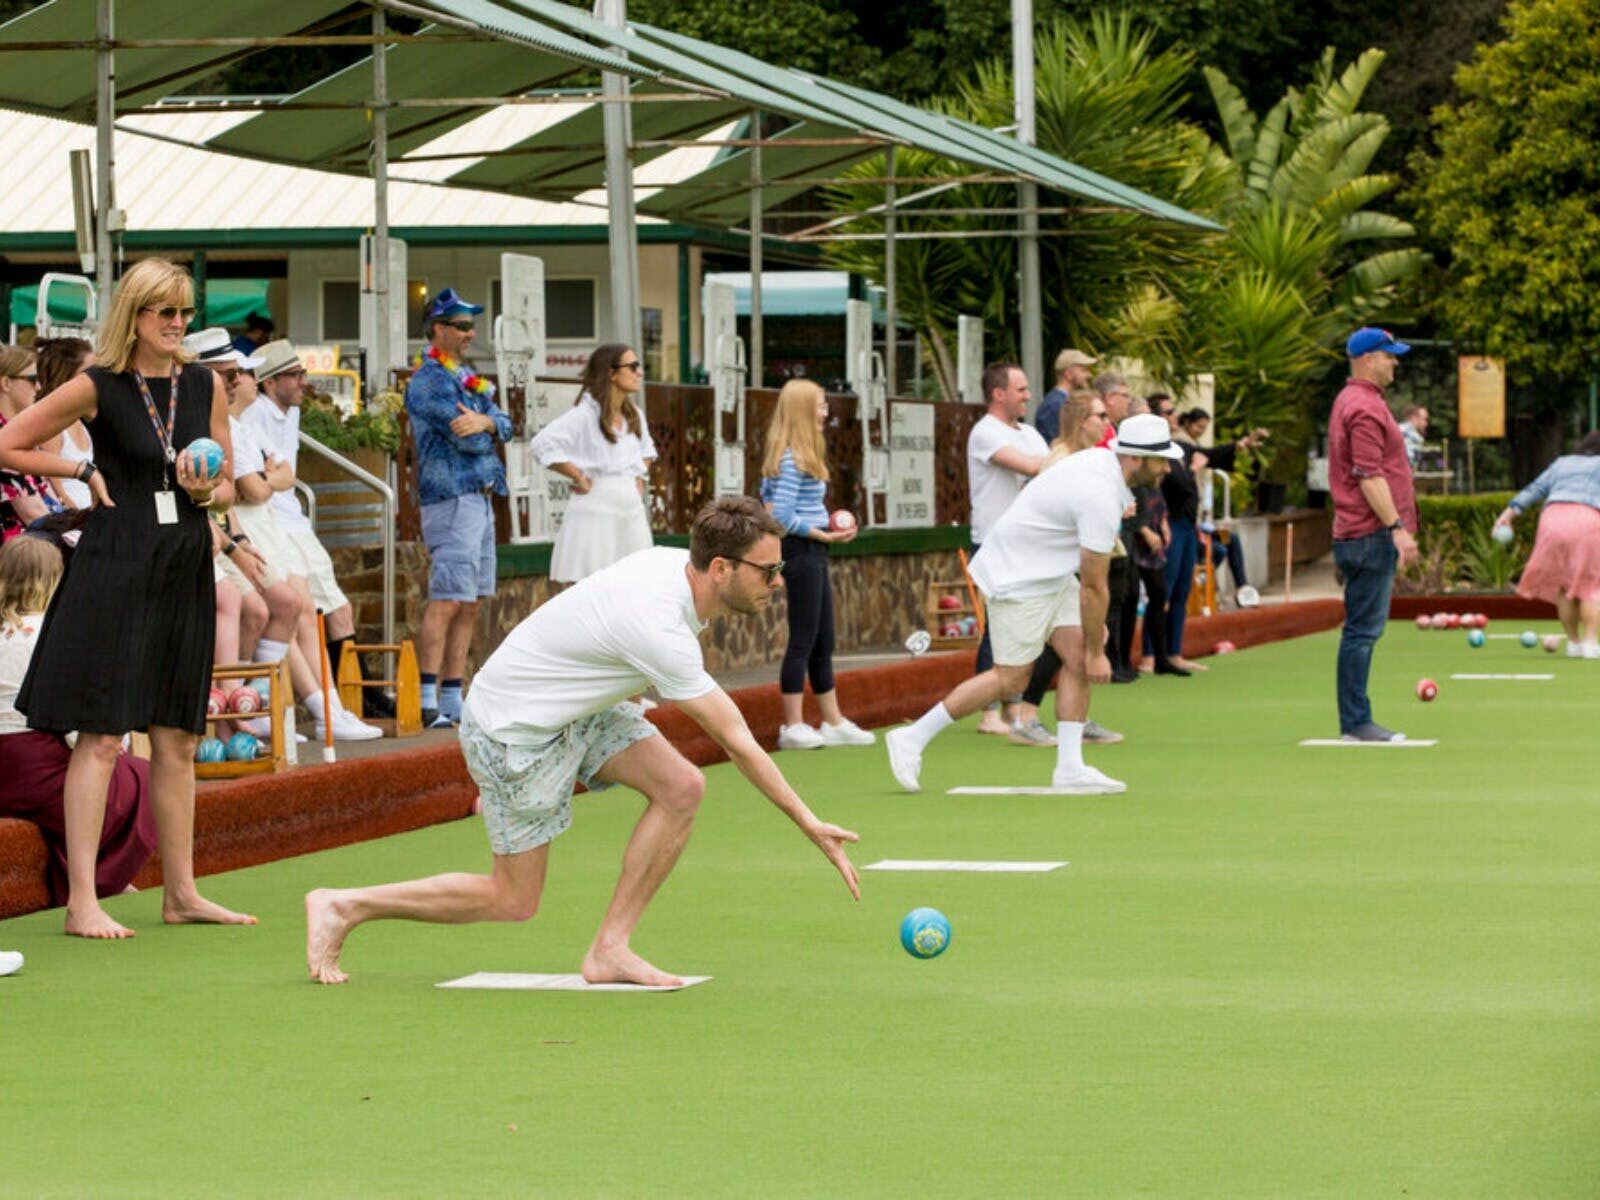 Lawn Bowls on the Green